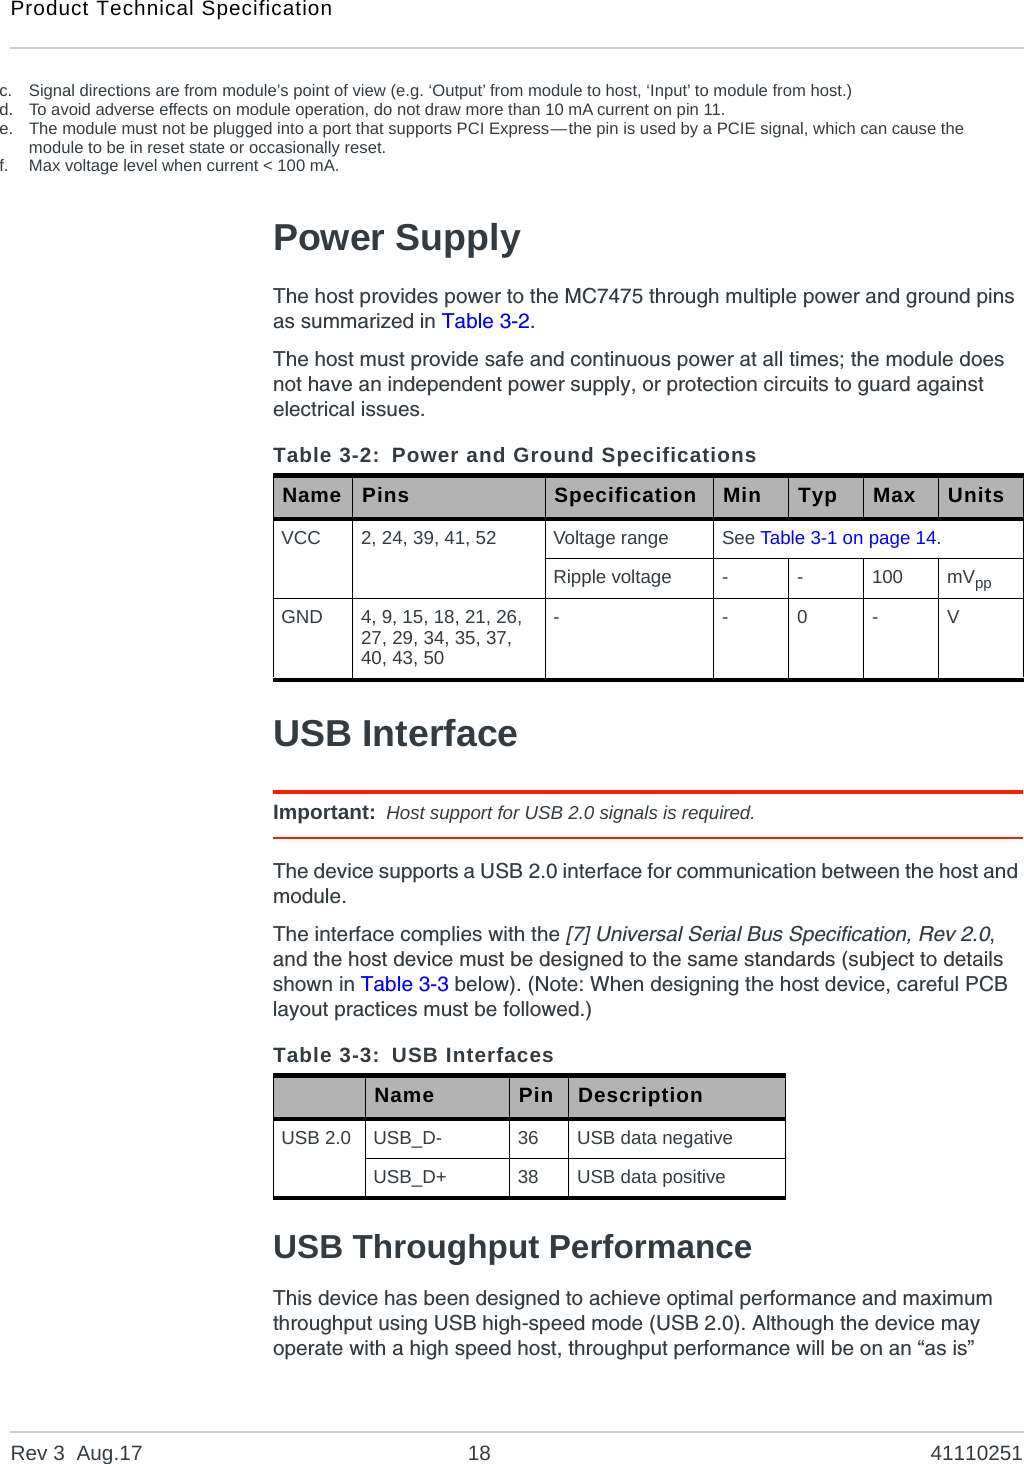 Product Technical SpecificationRev 3  Aug.17 18 41110251Power SupplyThe host provides power to the MC7475 through multiple power and ground pins as summarized in Table 3-2.The host must provide safe and continuous power at all times; the module does not have an independent power supply, or protection circuits to guard against electrical issues.USB InterfaceImportant: Host support for USB 2.0 signals is required.The device supports a USB 2.0 interface for communication between the host and module.The interface complies with the [7] Universal Serial Bus Specification, Rev 2.0, and the host device must be designed to the same standards (subject to details shown in Table 3-3 below). (Note: When designing the host device, careful PCB layout practices must be followed.)USB Throughput PerformanceThis device has been designed to achieve optimal performance and maximum throughput using USB high-speed mode (USB 2.0). Although the device may operate with a high speed host, throughput performance will be on an “as is” c. Signal directions are from module’s point of view (e.g. ‘Output’ from module to host, ‘Input’ to module from host.)d. To avoid adverse effects on module operation, do not draw more than 10 mA current on pin 11.e. The module must not be plugged into a port that supports PCI Express—the pin is used by a PCIE signal, which can cause the module to be in reset state or occasionally reset.f. Max voltage level when current &lt; 100 mA.Table 3-2: Power and Ground SpecificationsName Pins Specification Min Typ Max UnitsVCC 2, 24, 39, 41, 52 Voltage range See Table 3-1 on page 14.Ripple voltage --100 mVppGND 4, 9, 15, 18, 21, 26, 27, 29, 34, 35, 37, 40, 43, 50- - 0 - VTable 3-3: USB InterfacesName Pin DescriptionUSB 2.0 USB_D- 36 USB data negativeUSB_D+ 38 USB data positive